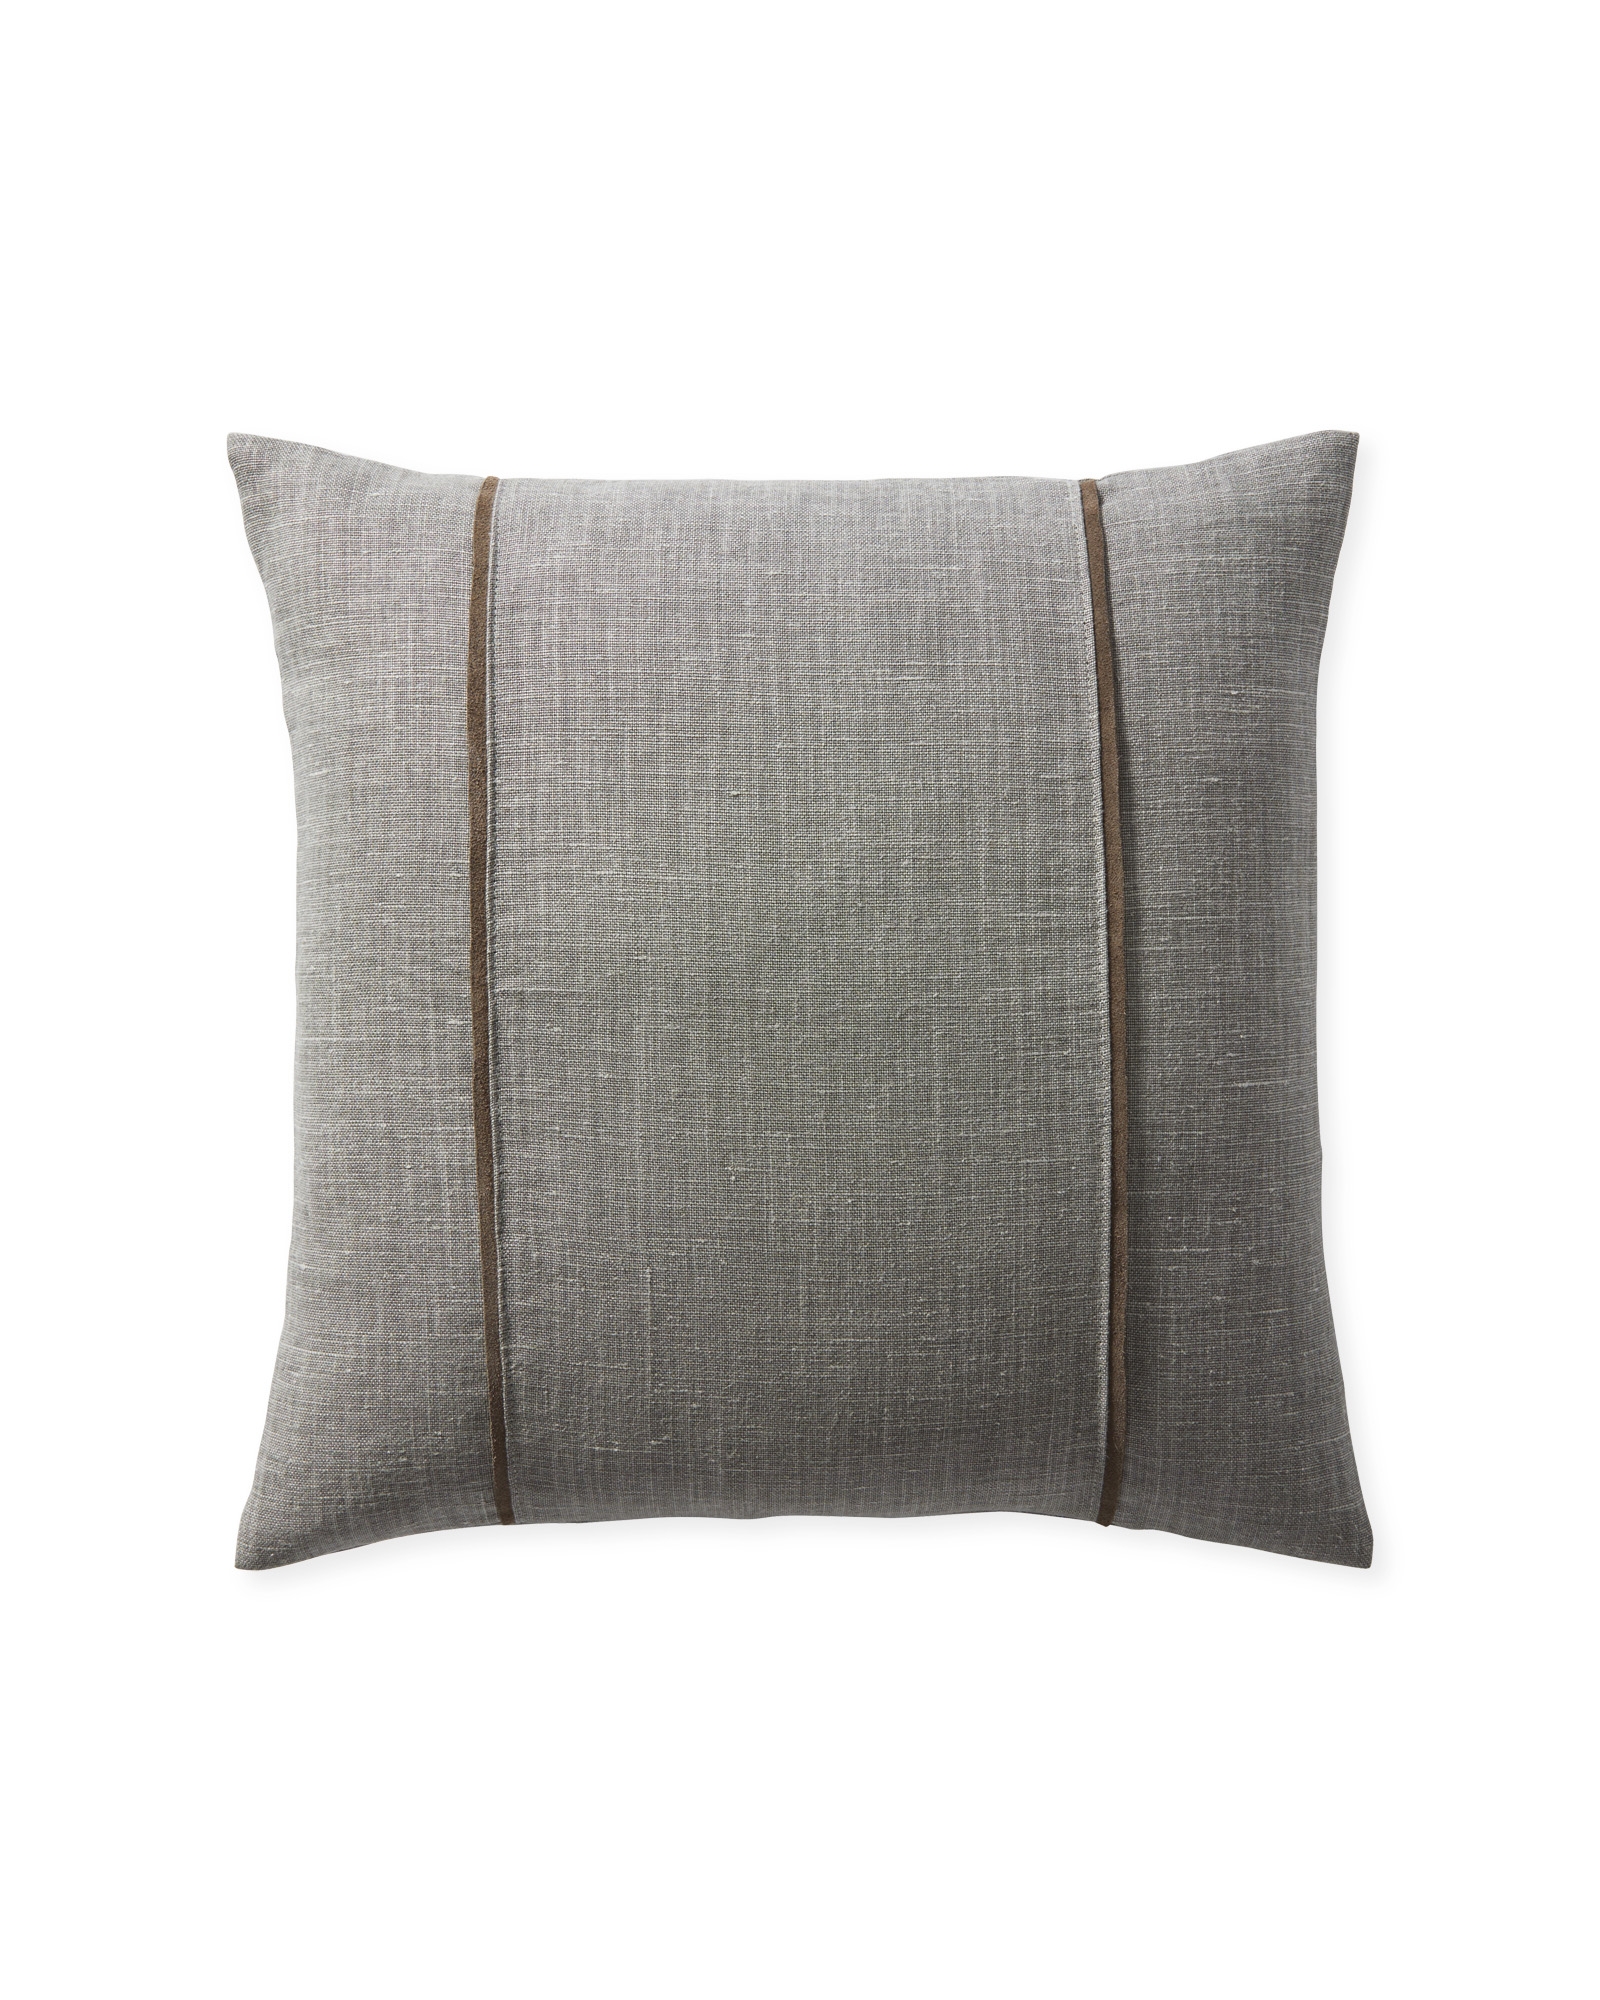 Kentfield 20" SQ Pillow Cover - Smoke - Insert sold separately - Image 0